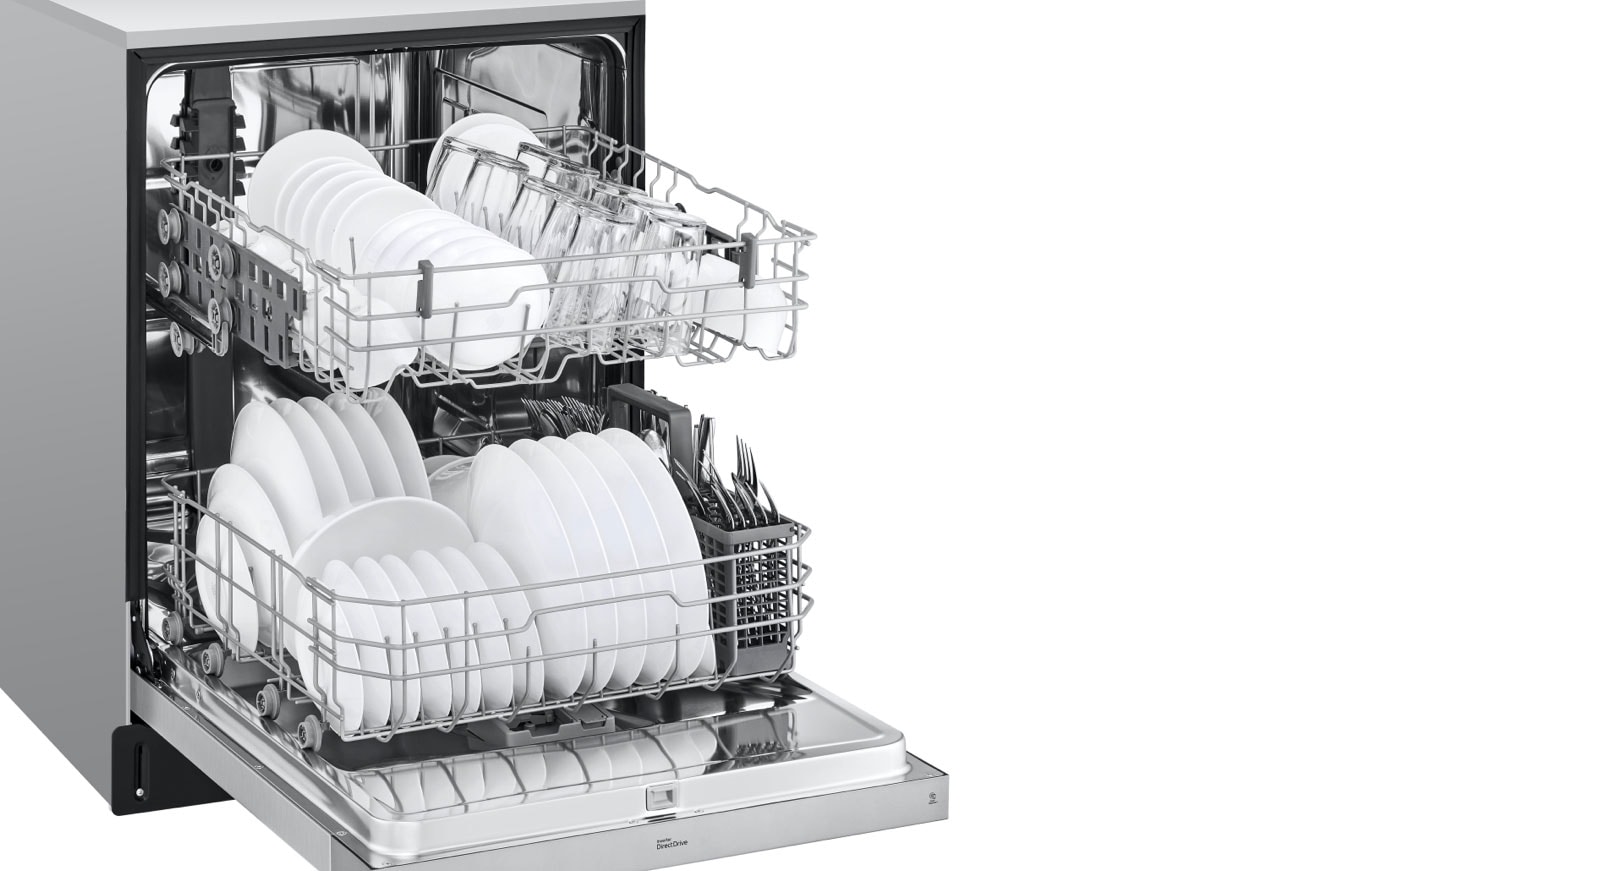 Make cleanup easy with this spacious dishwasher1